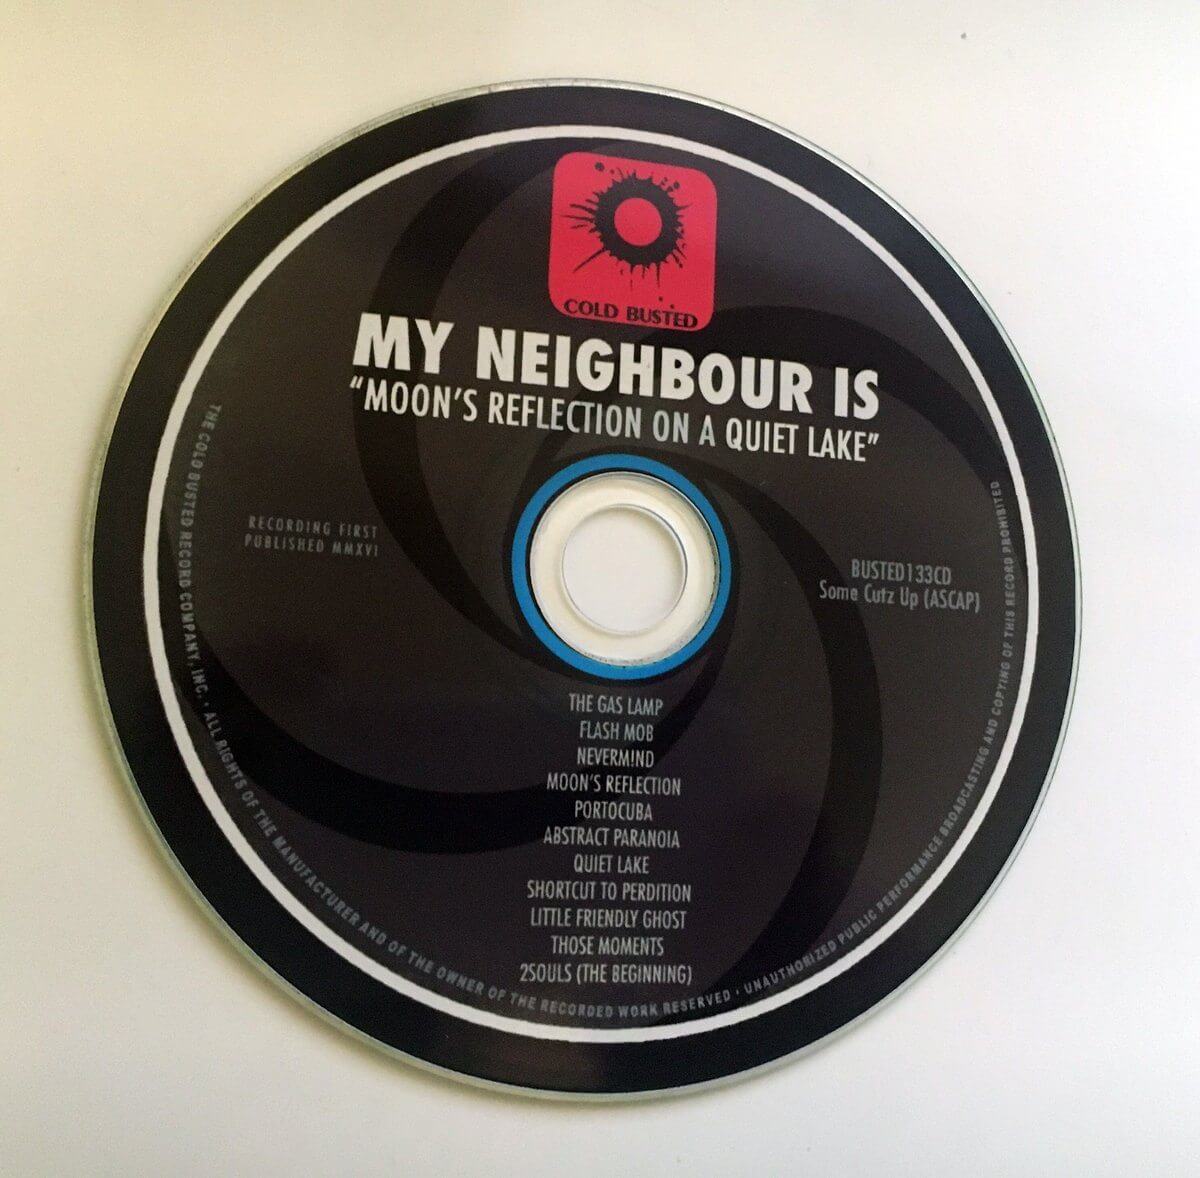 My Neighbour Is - Moon's Reflection On A Quiet Lake - Limited Edition Compact Disc - Cold Busted